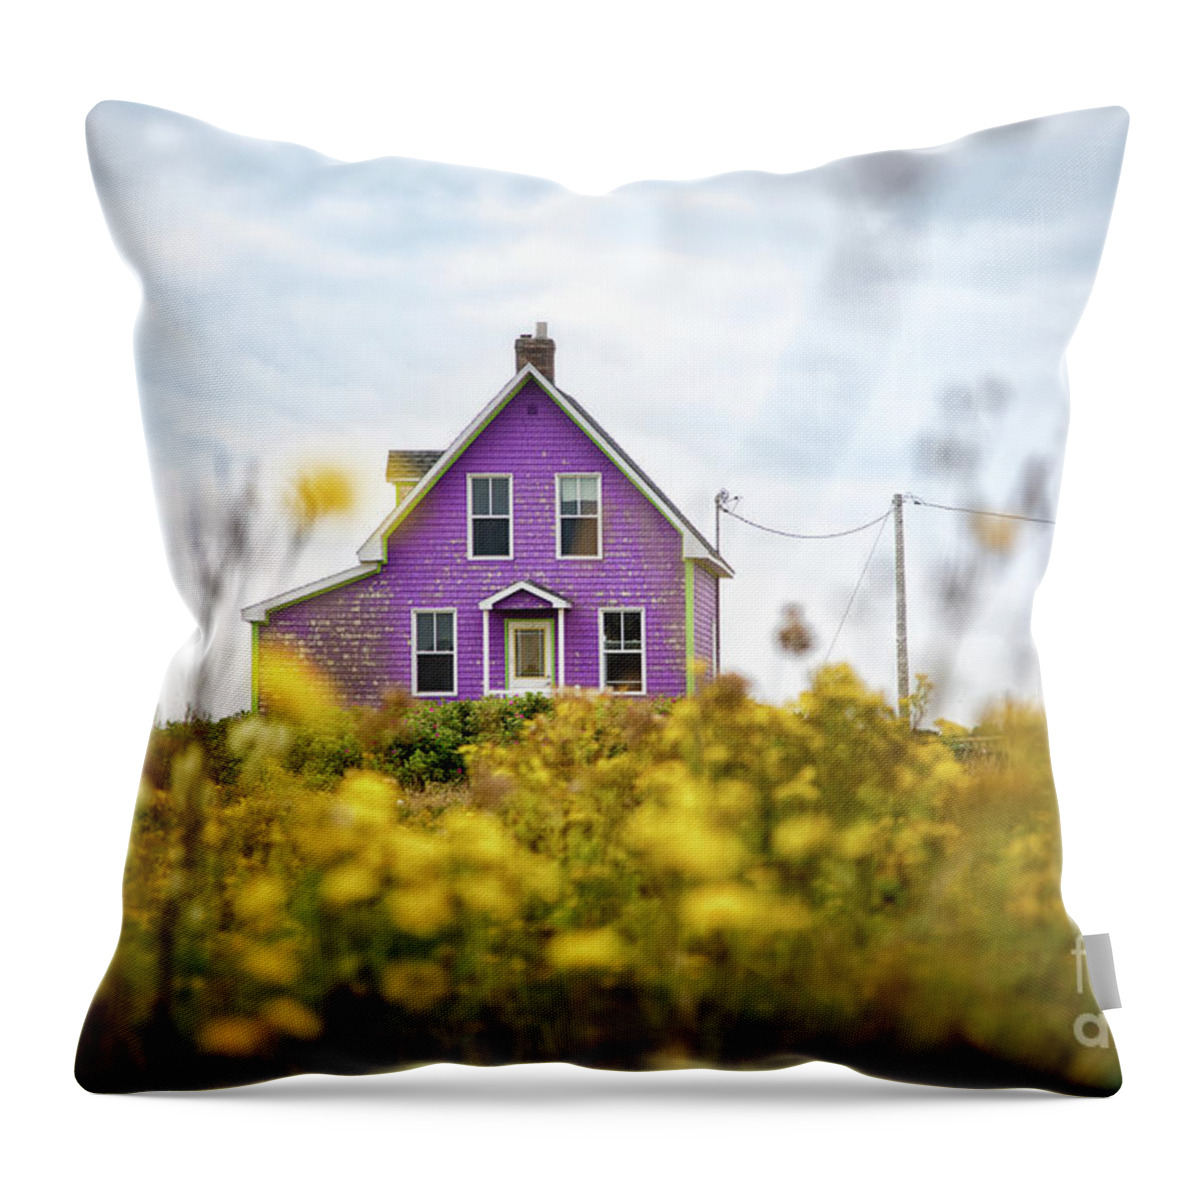 Island Throw Pillow featuring the photograph Purple house and yellow flowers by Jane Rix